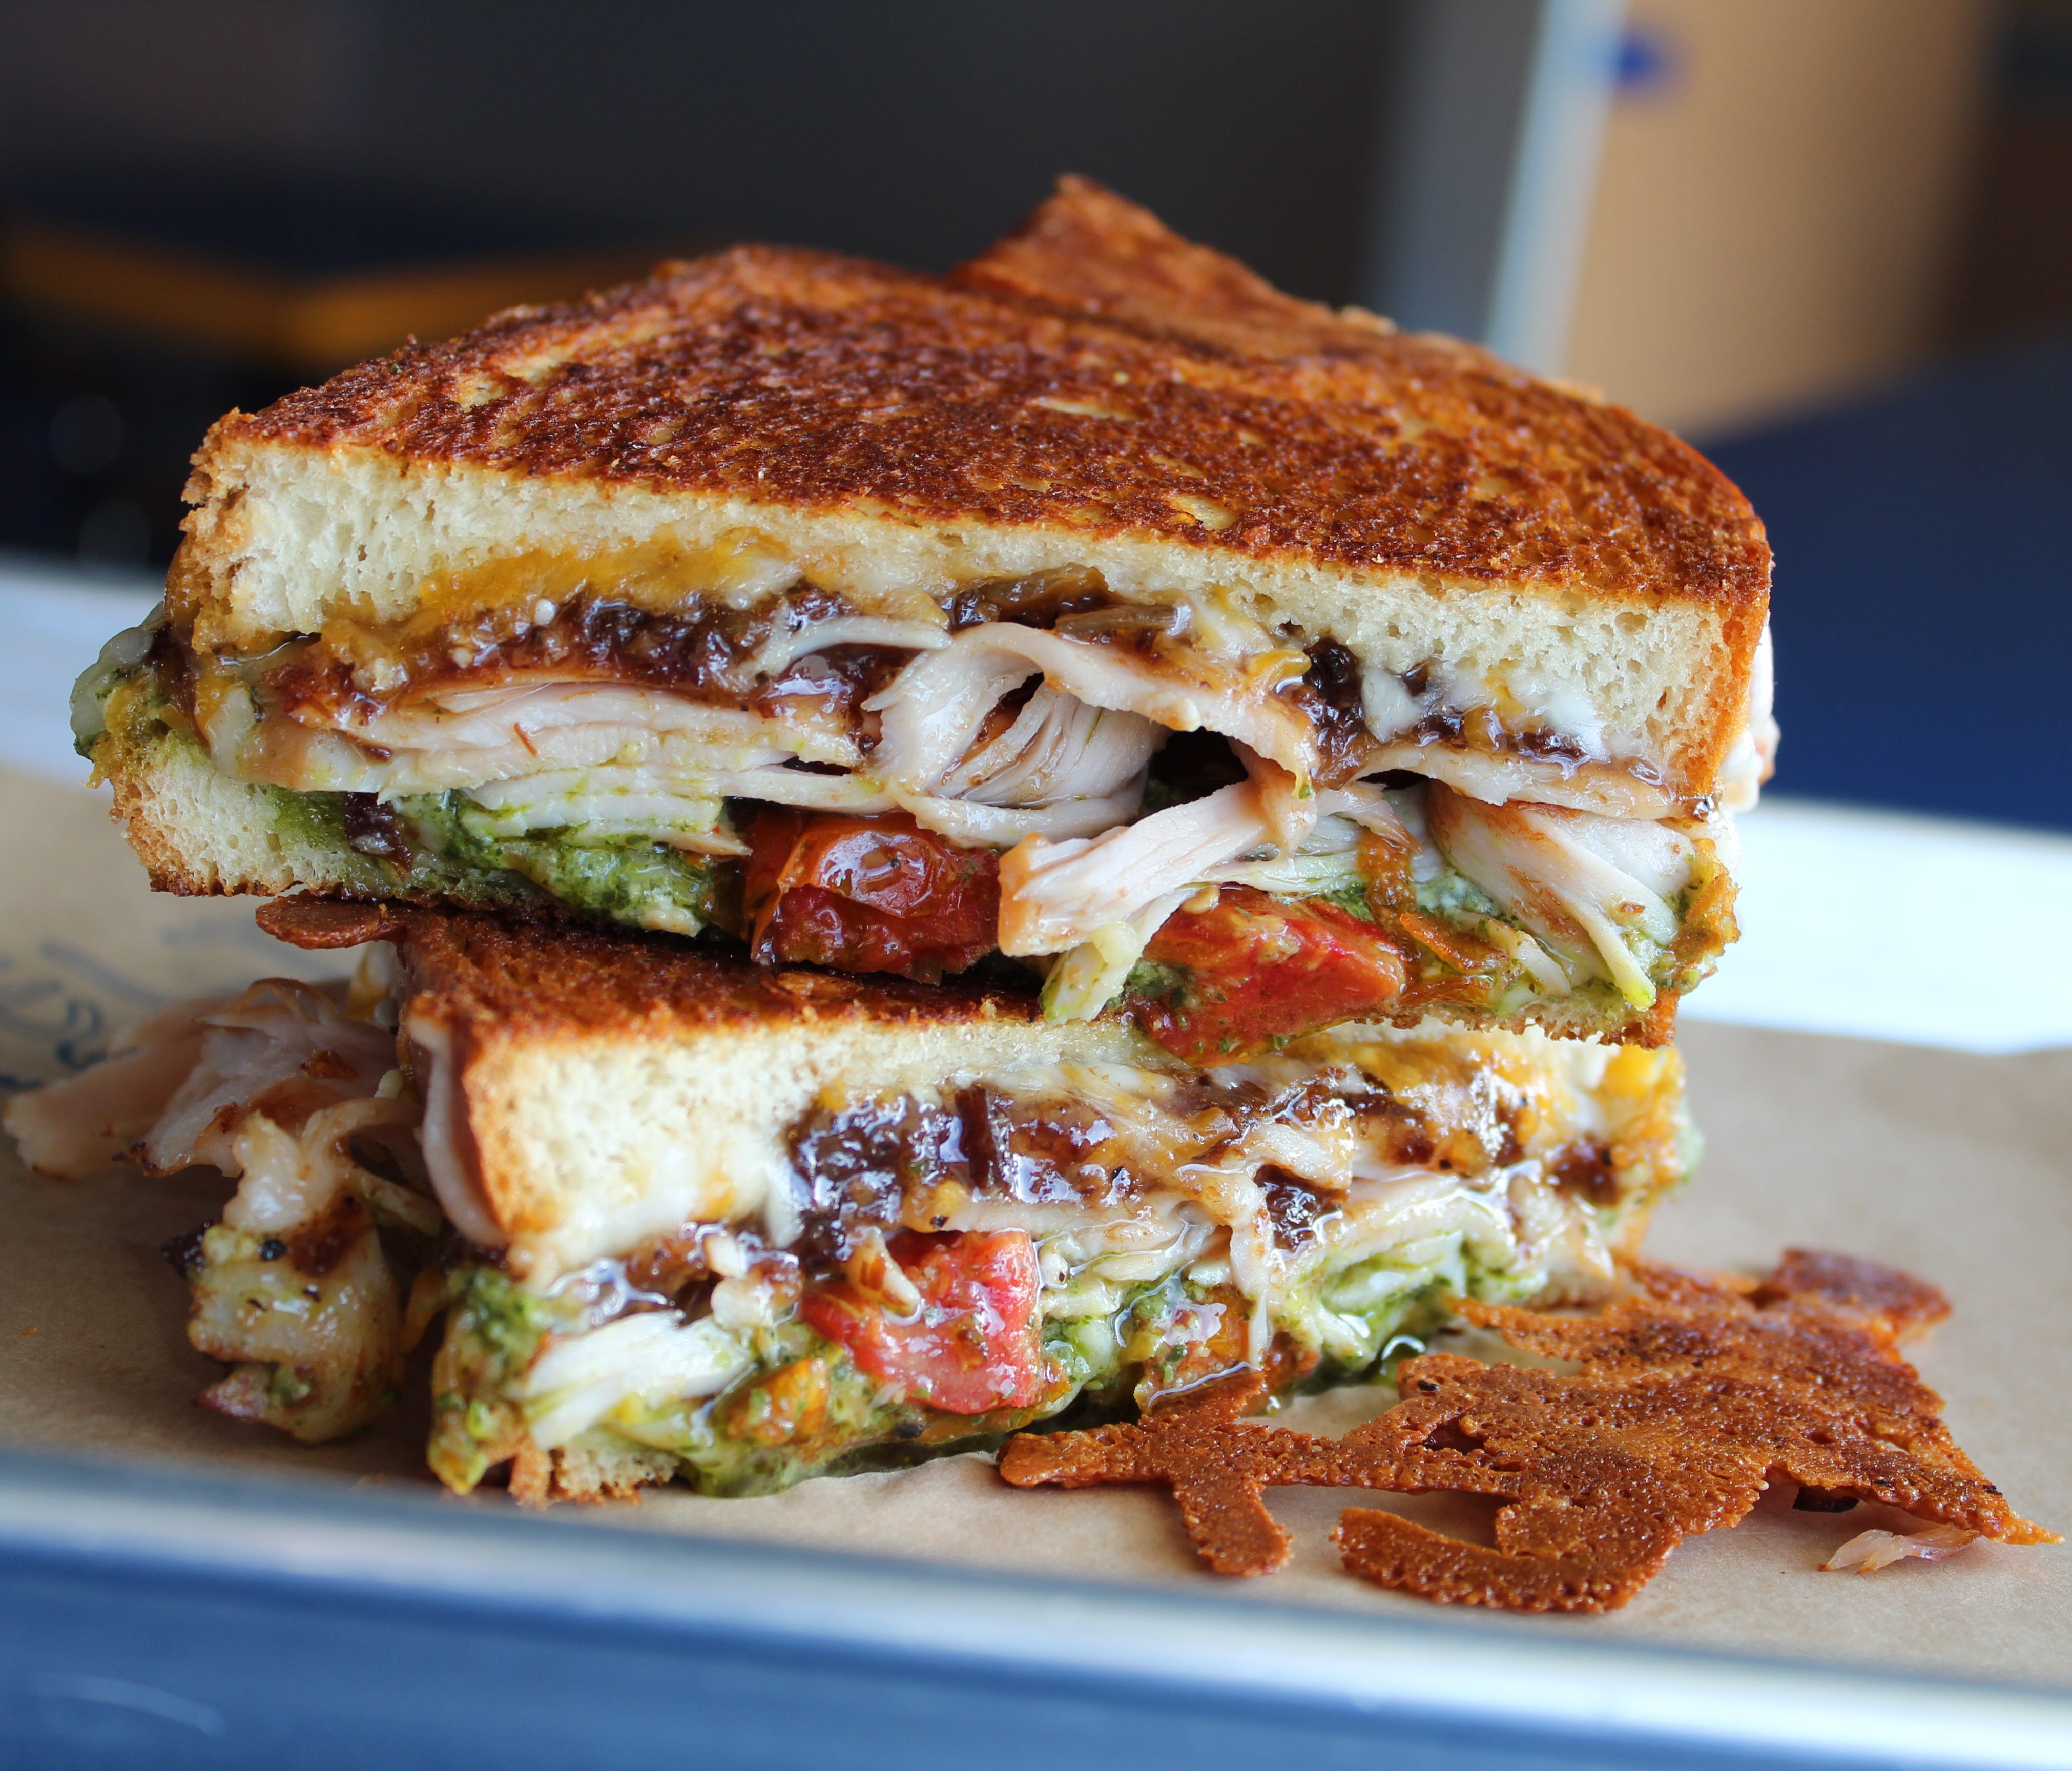 In Coeur d'Alene, Idaho, Meltz Extreme Grilled Cheese  makes big and bold sandwiches packed with ingredients that push the definition of grilled cheese to the limit. The We Be Jam'in is made with three cheeses -- mozzarella, Gorgonzola and white ched